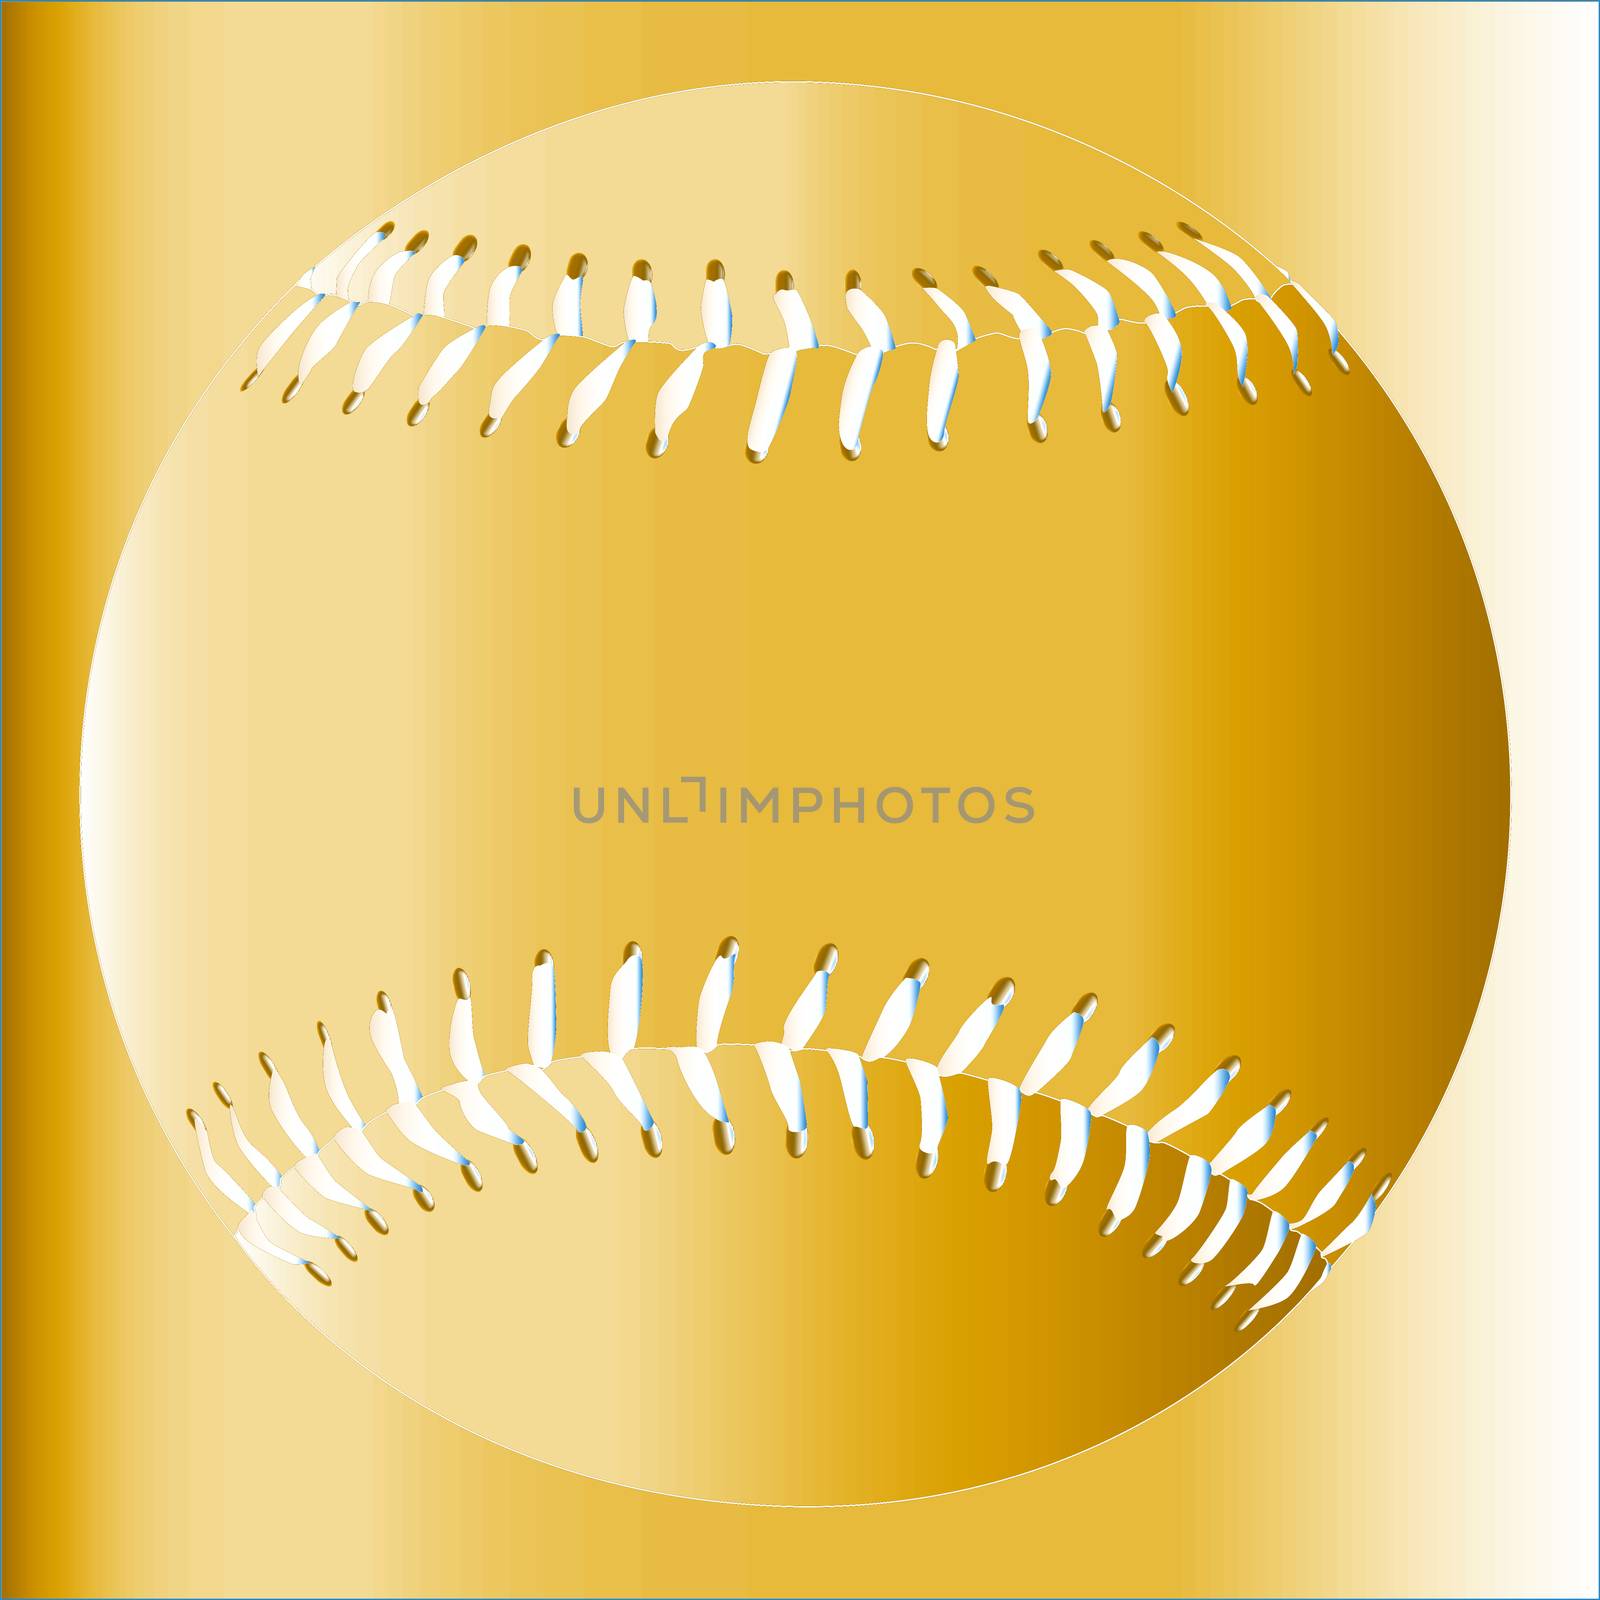 A new golden abstract baseball with stitching on a faded background.